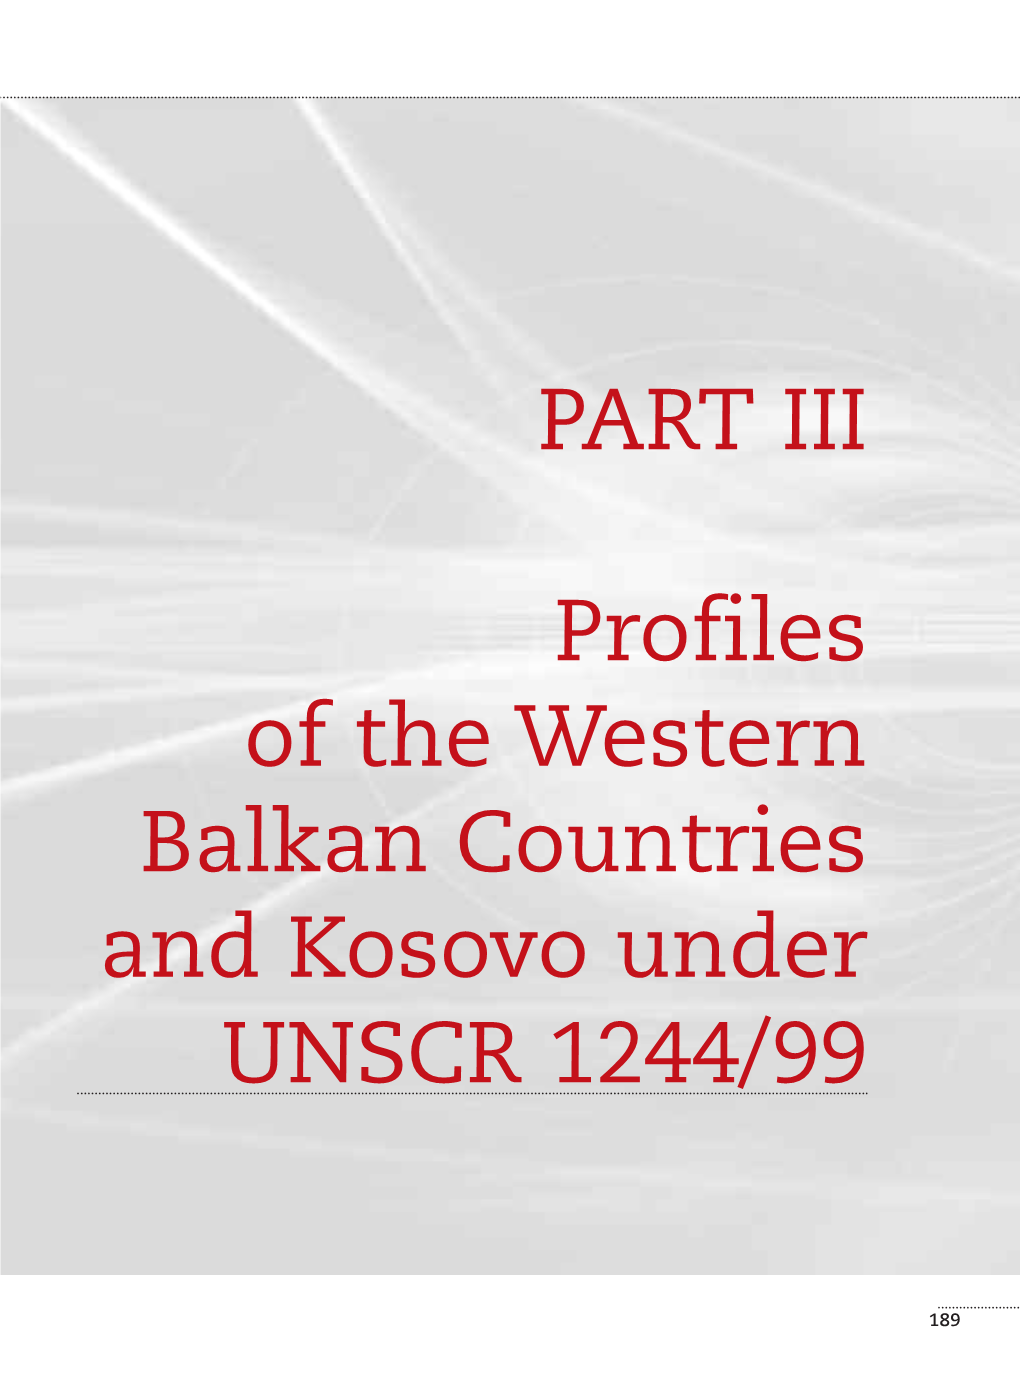 Performance Profiles of the Western Balkan Countries and Kosovo Under UNSCR 1244/99